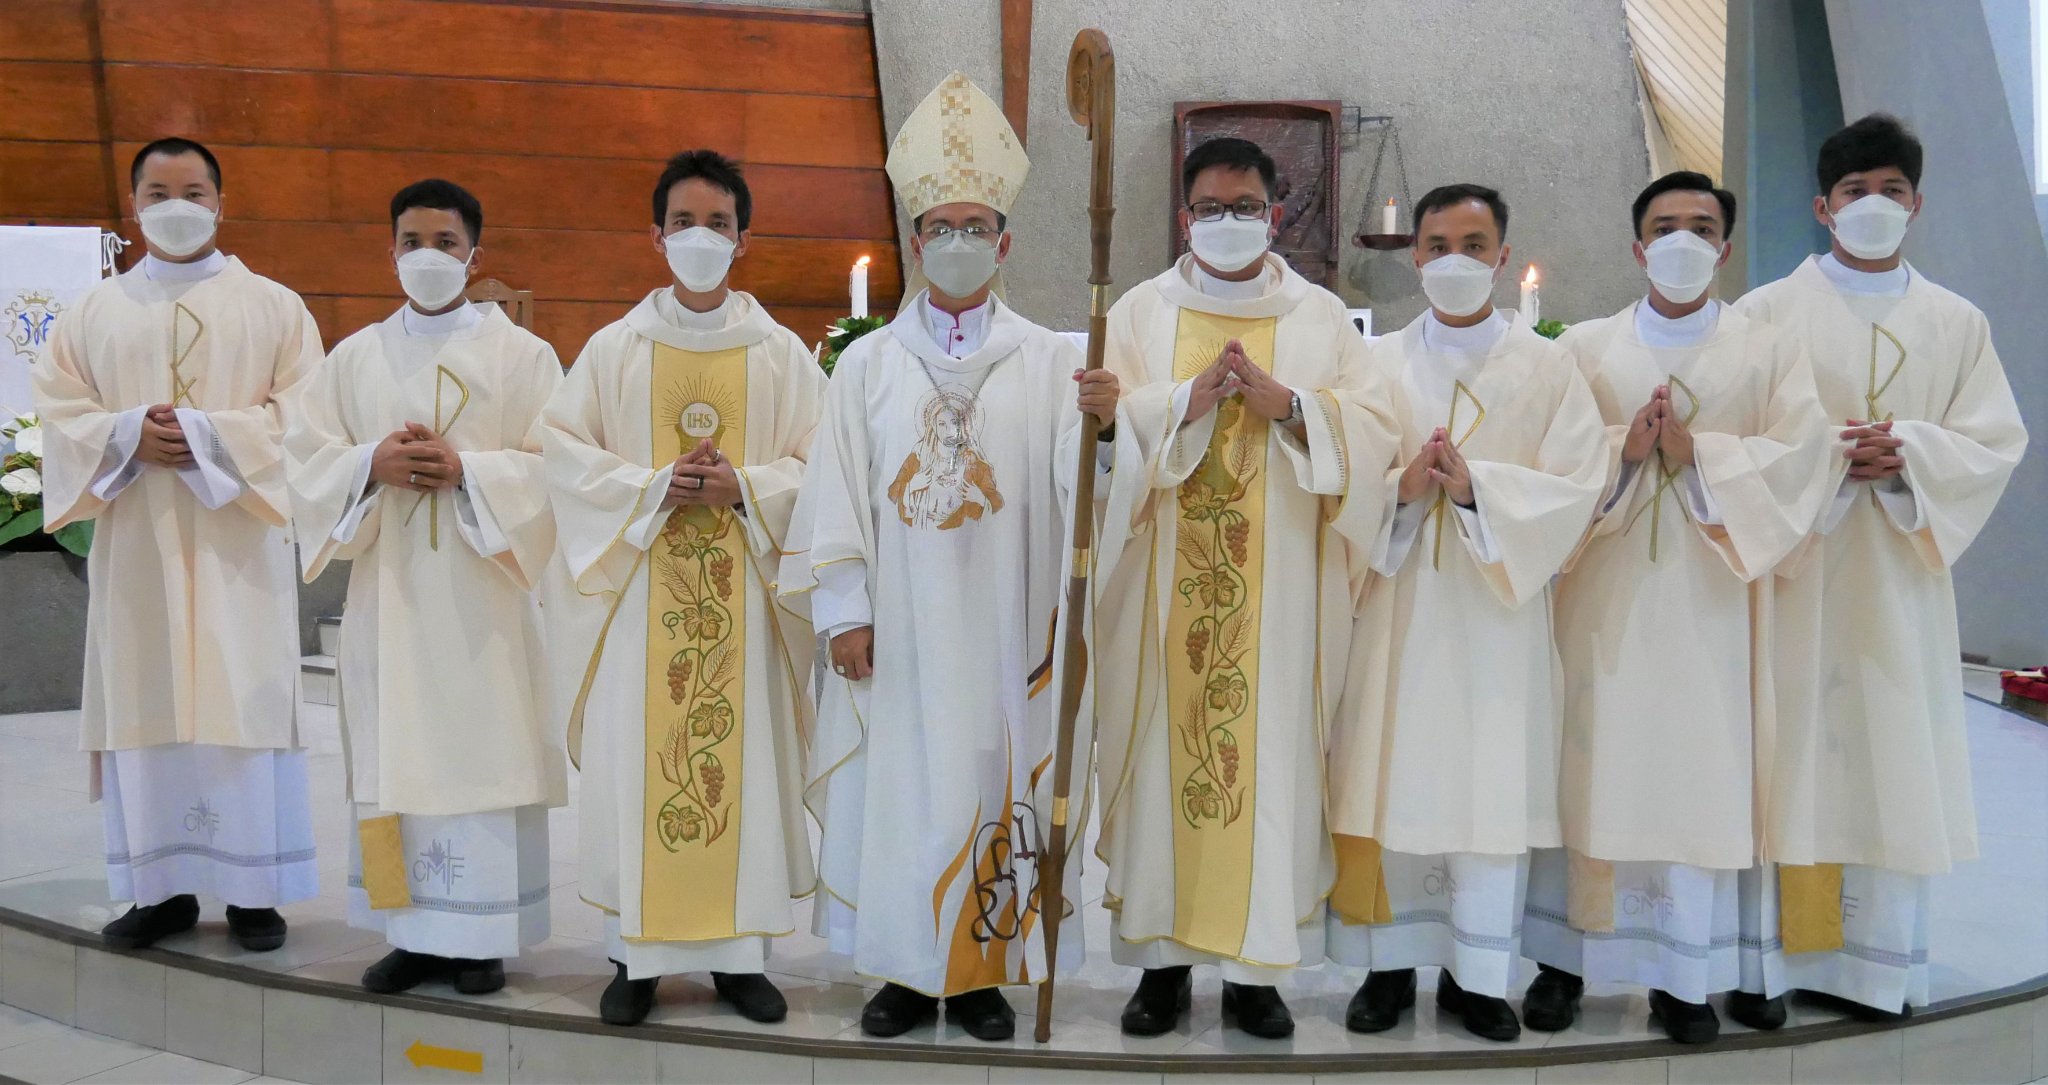 Ordinations In The Philippines On July 16, 2022